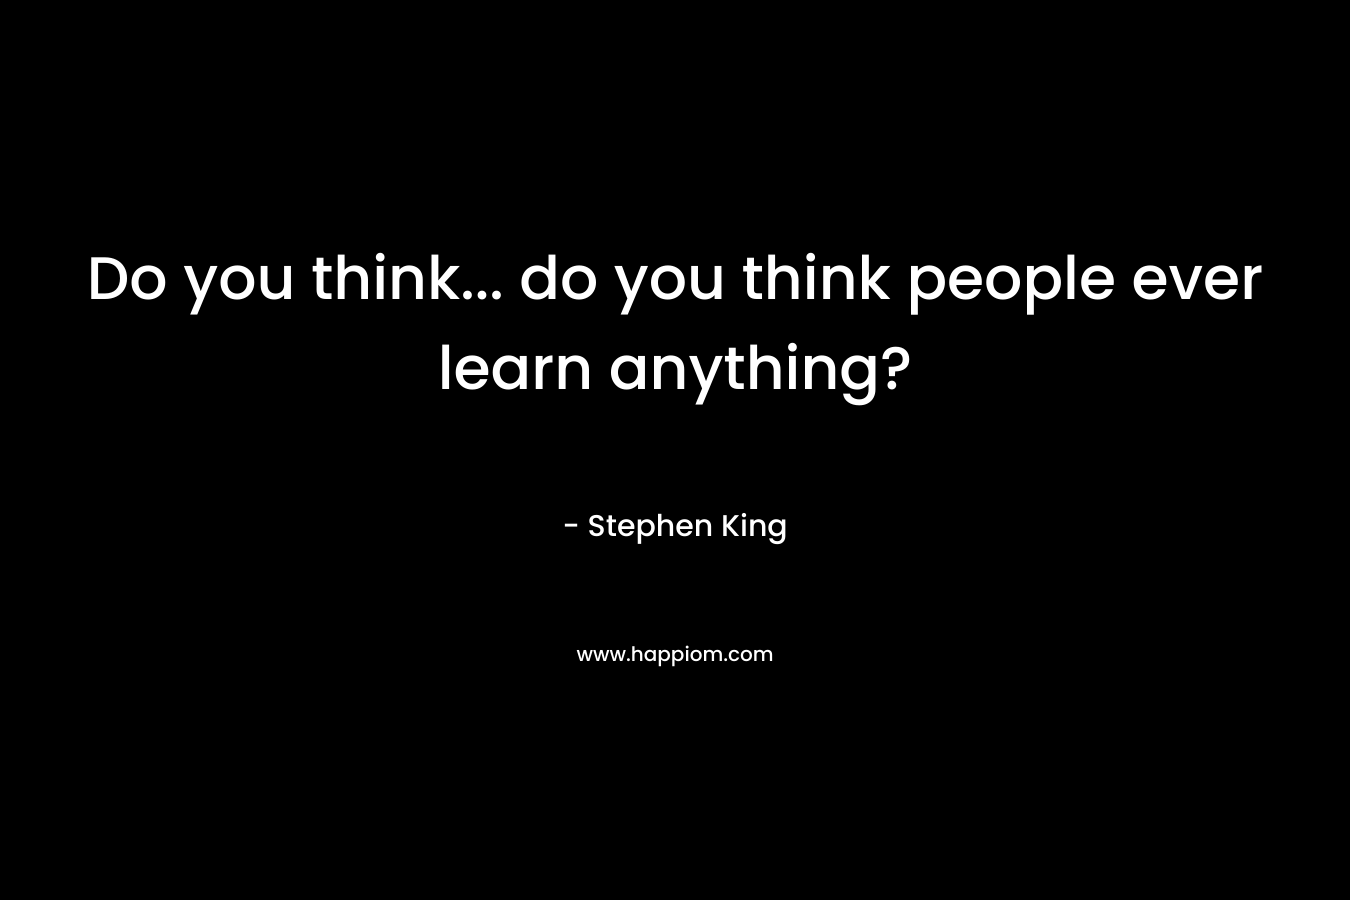 Do you think... do you think people ever learn anything?